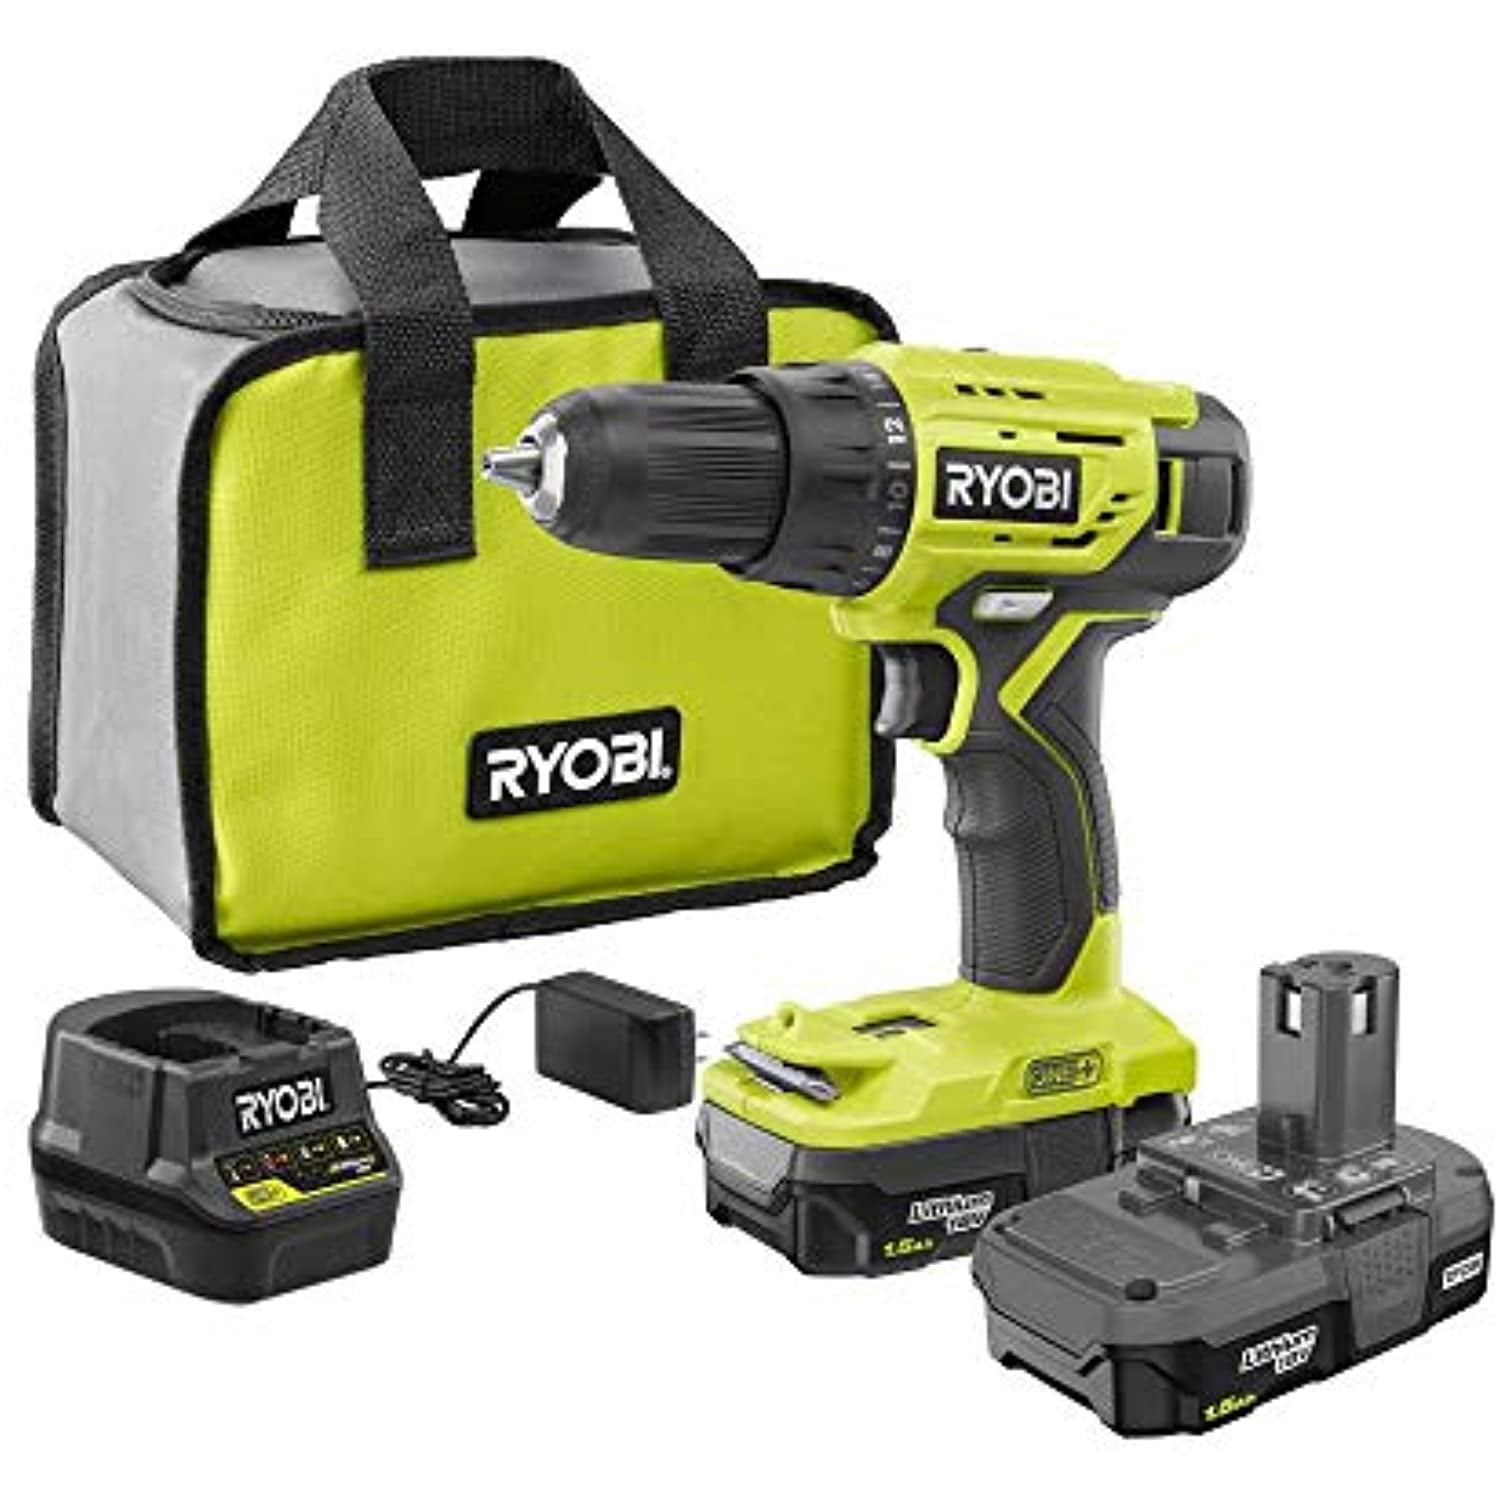 Ryobi 18-Volt ONE+ Lithium-Ion 1/2 Drill/Driver Kit (2) 1.5 Ah Batteries, Charger, and Bag - Walmart.com